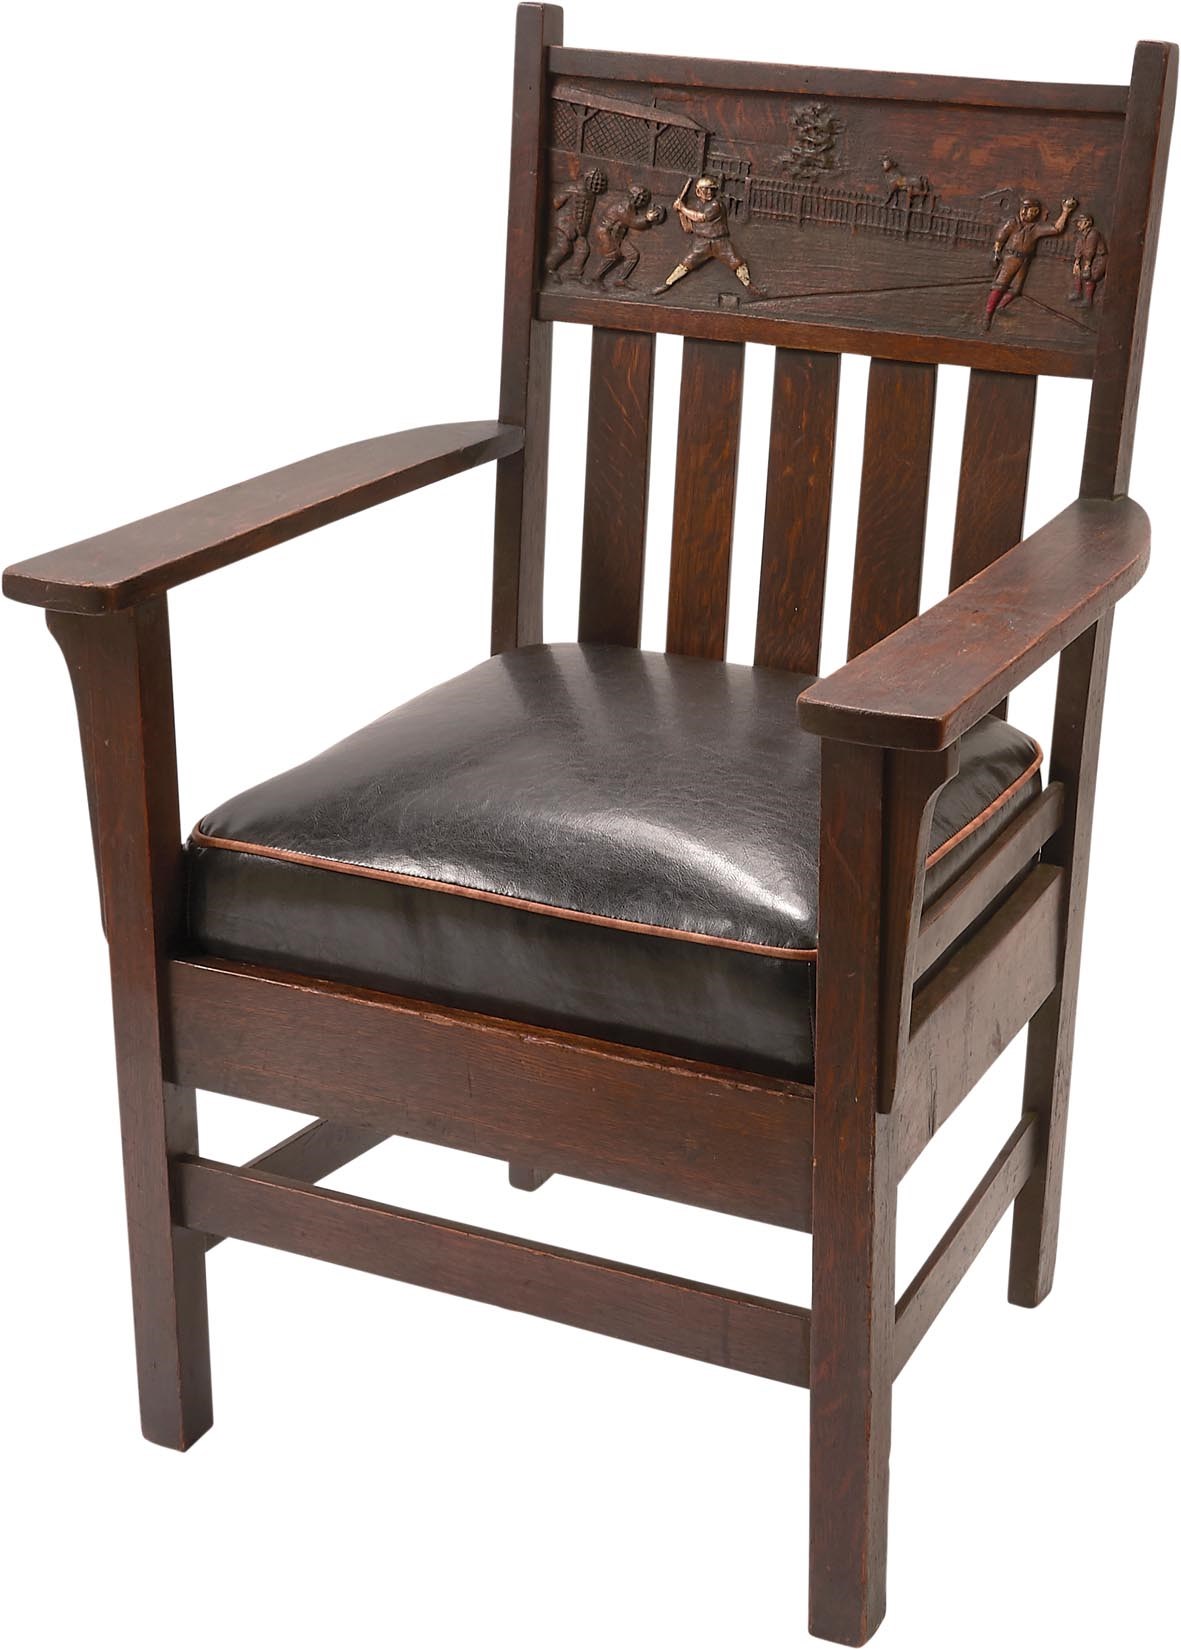 - 1910s Mission Oak Baseball Chair - Nicest We Have Seen